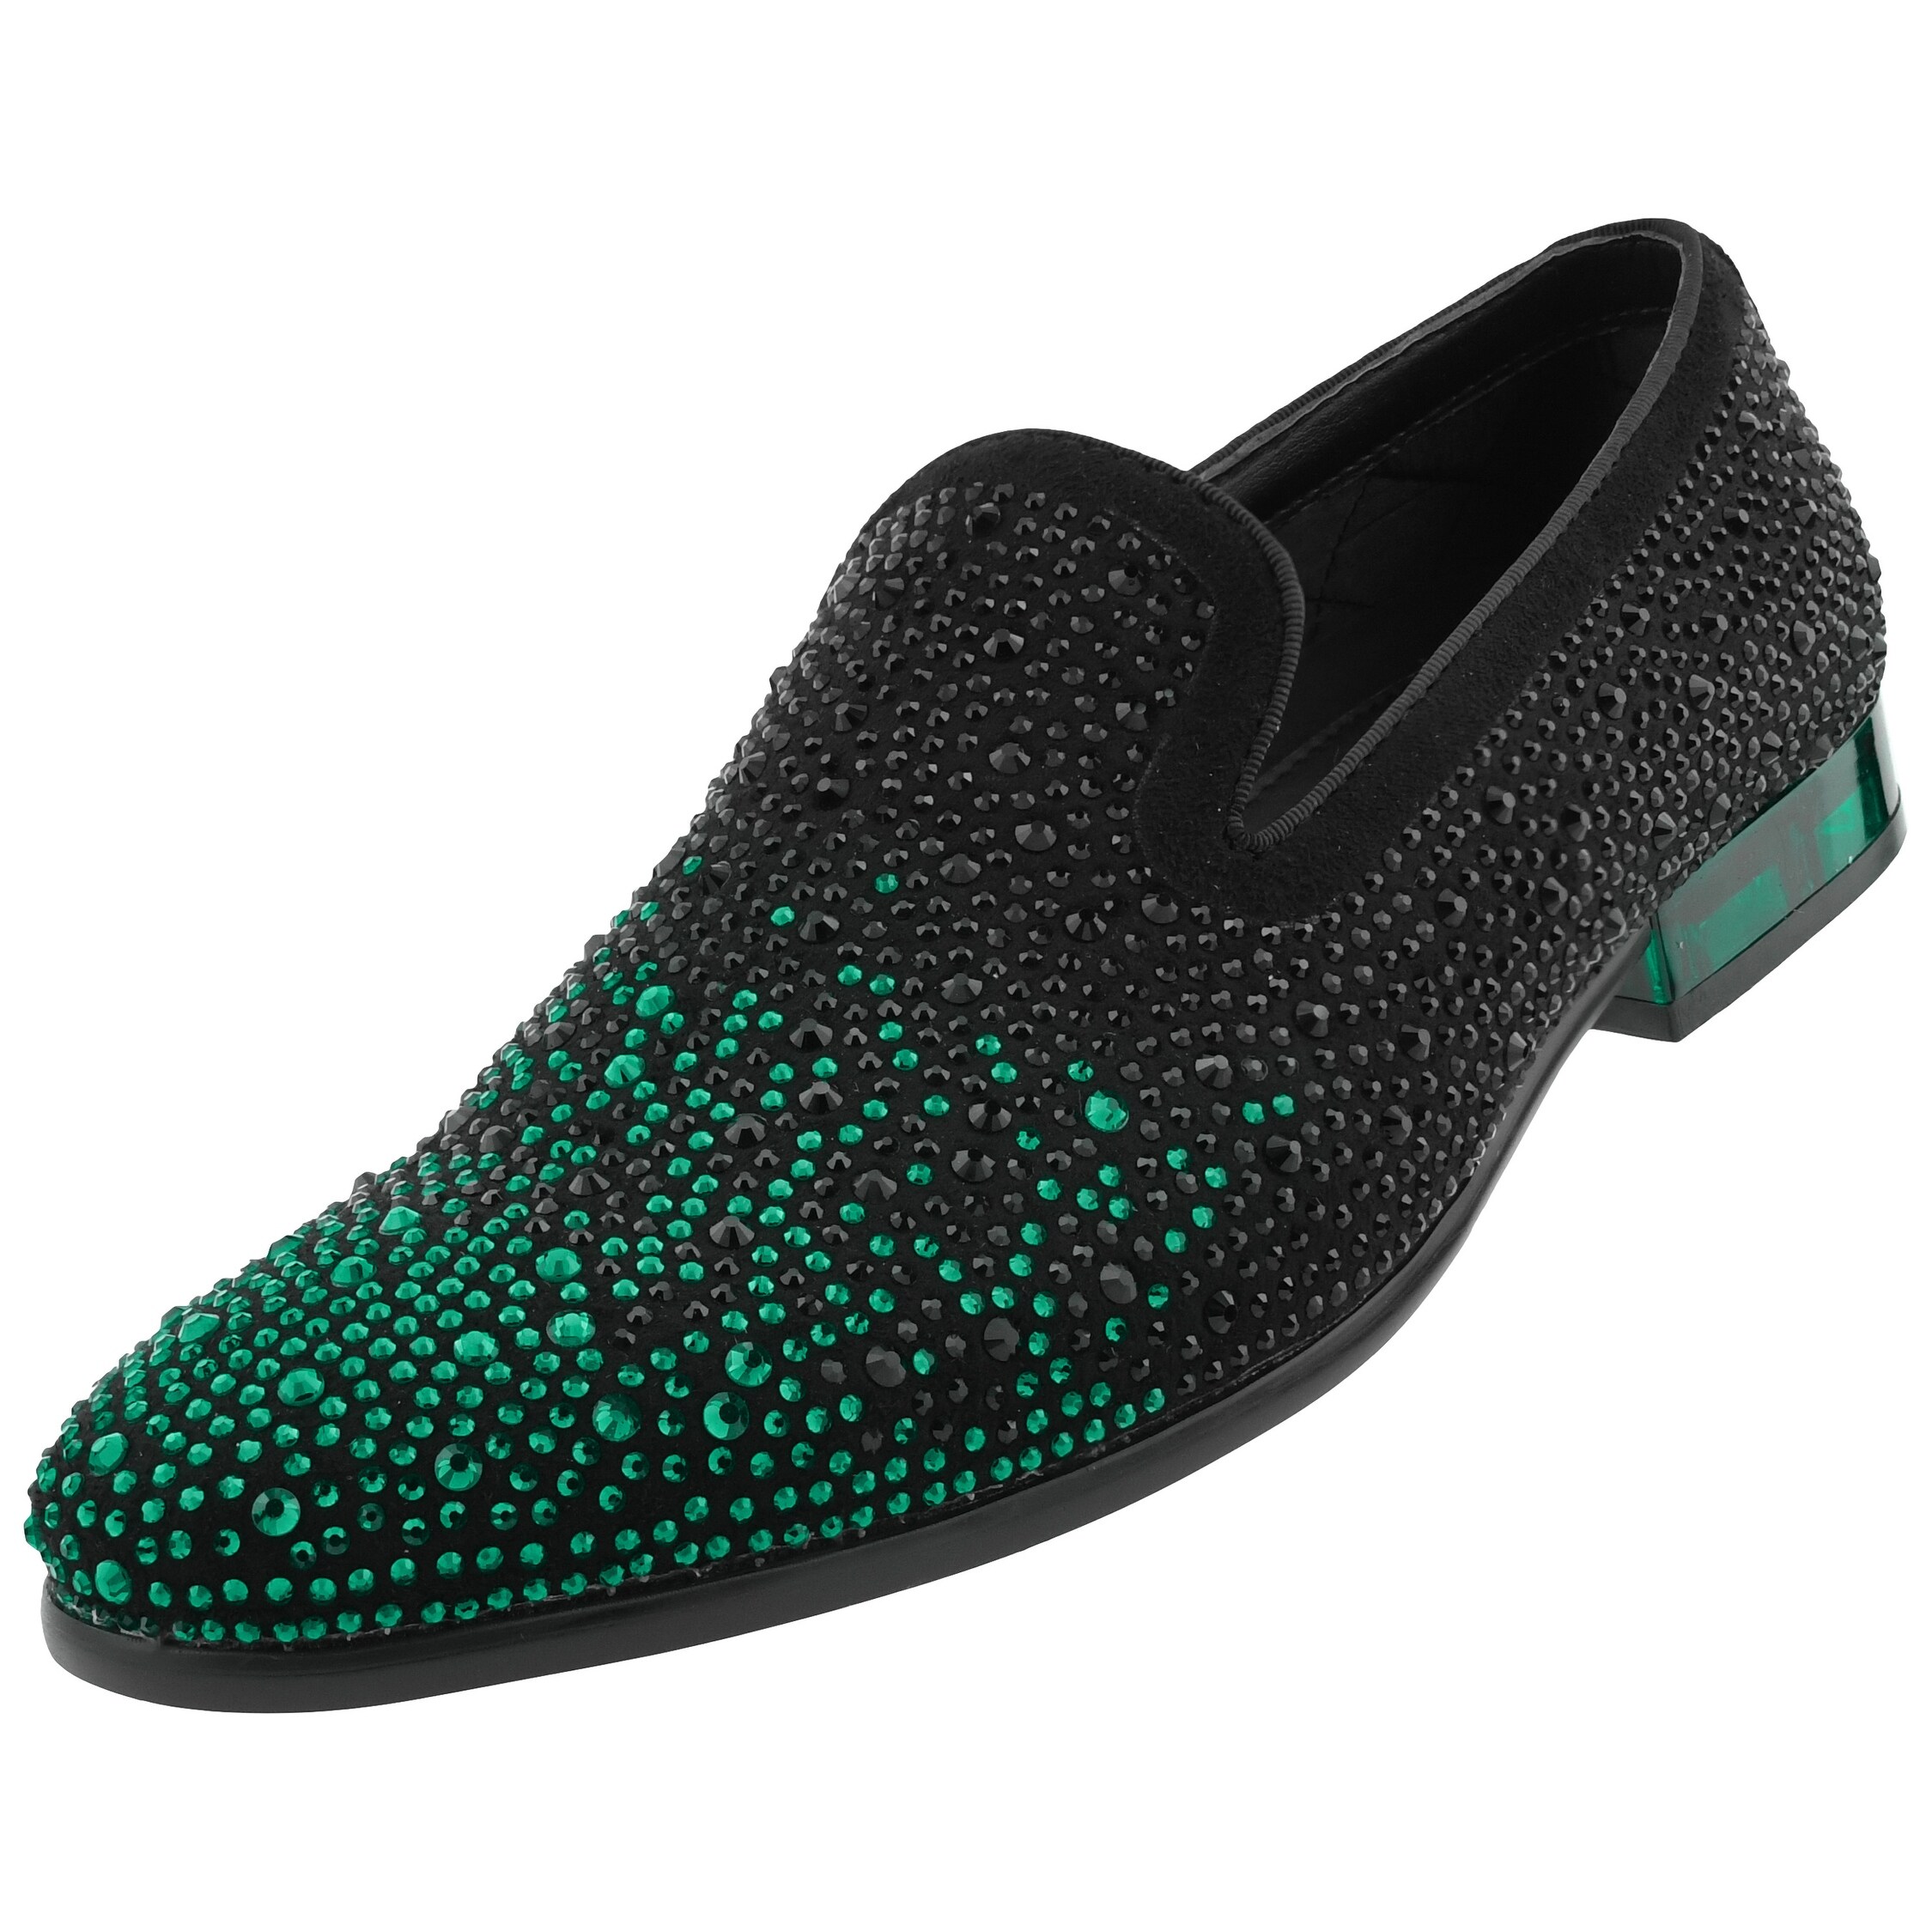 mens loafers with rhinestones